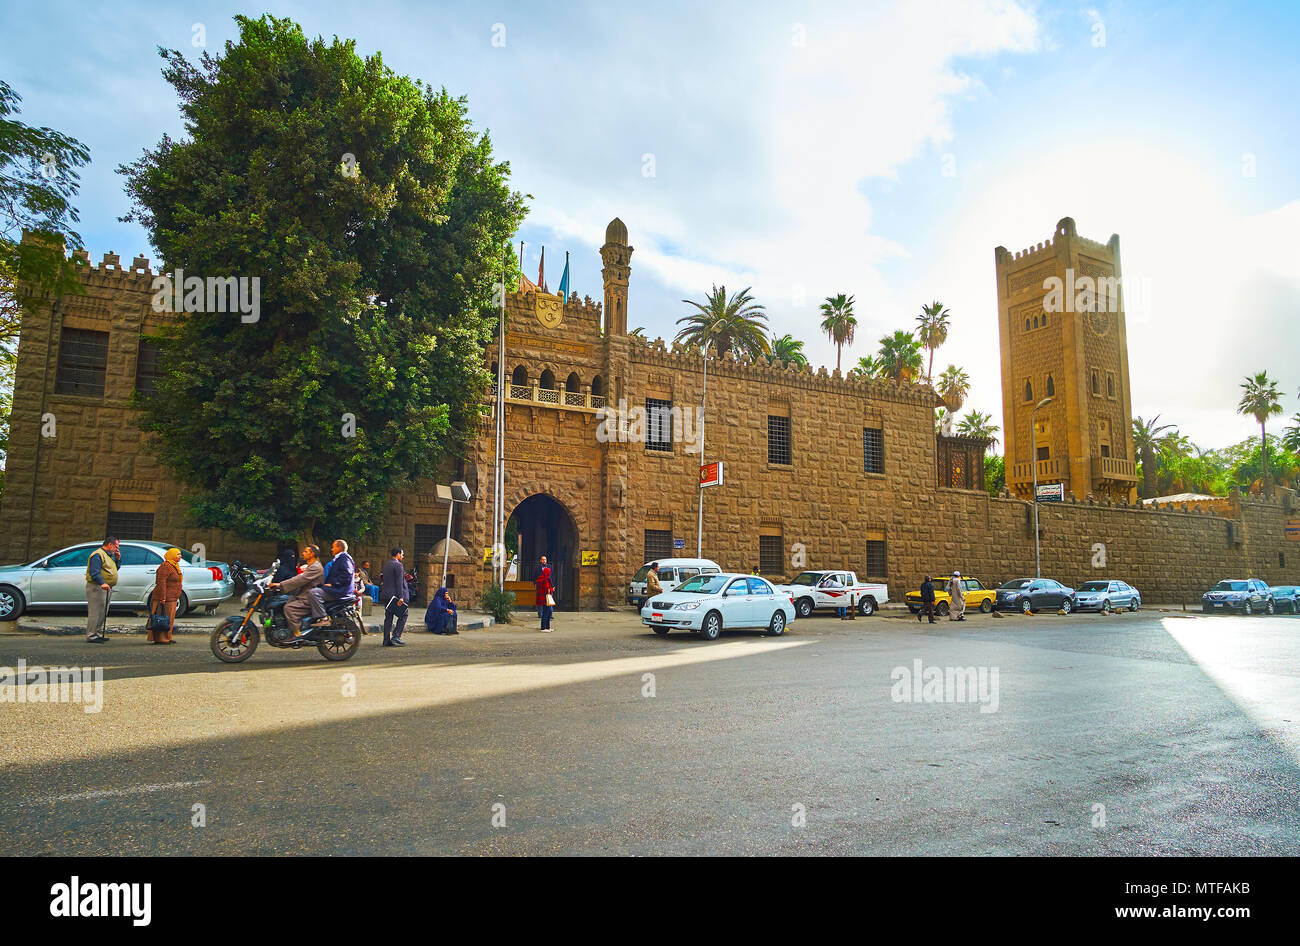 CAIRO, EGYPT - DECEMBER 24, 2017:  The facade of Manial Palace complex with the gate, Moroccan clock tower - minaret and stone wall, serving as a fenc Stock Photo